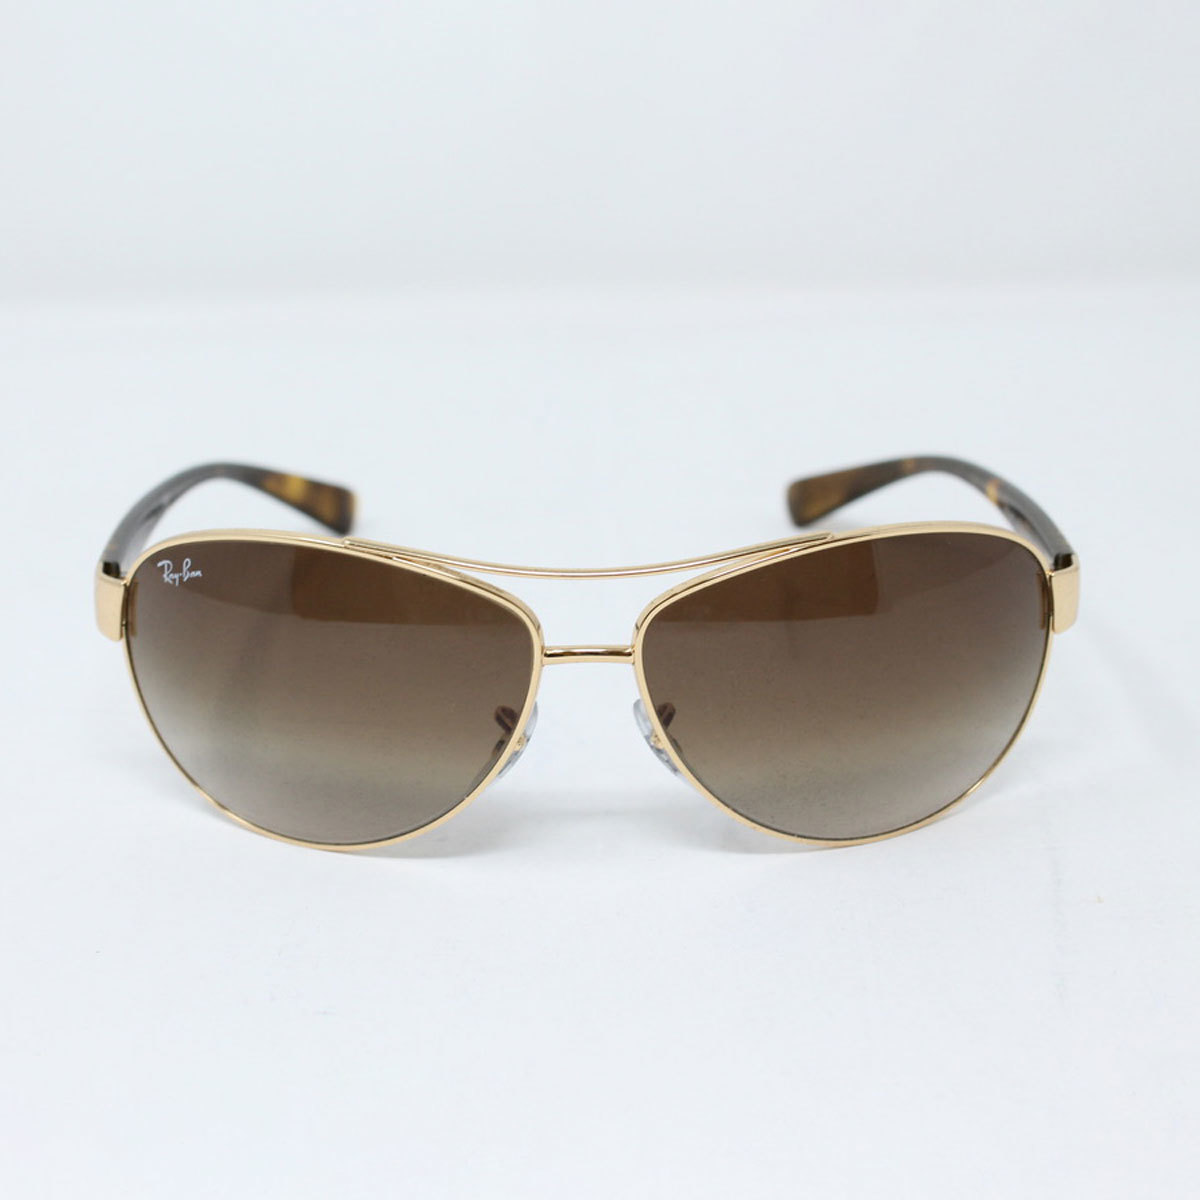 Ray-Ban Aviator Gold & Tortoise Shell Sunglasses with Brown Lenses, RB3386 001/13